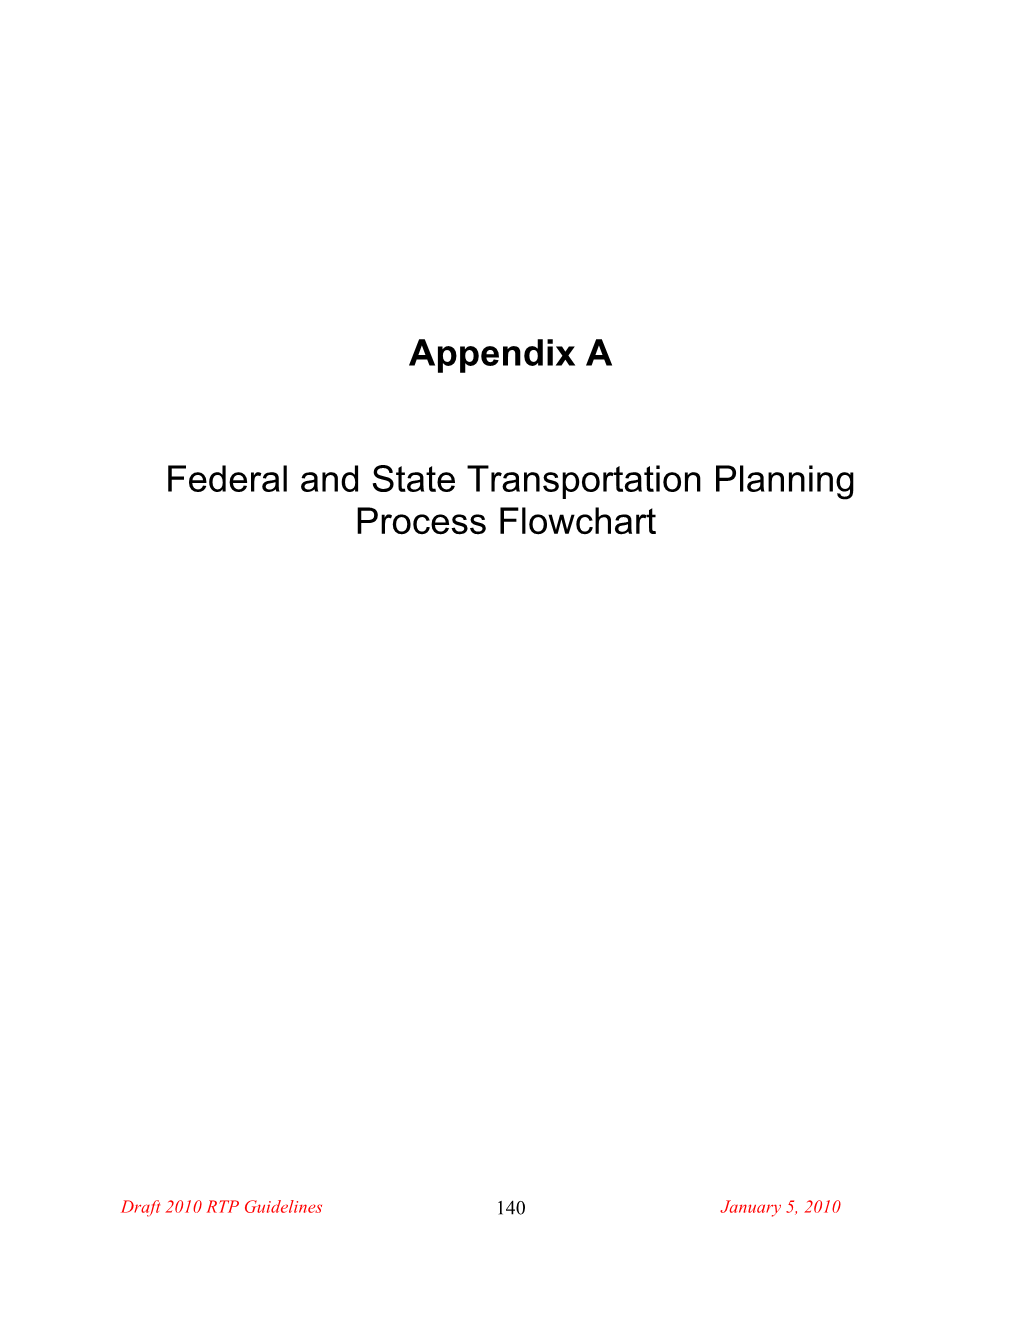 Federal and State Transportation Planning Process Flowchart